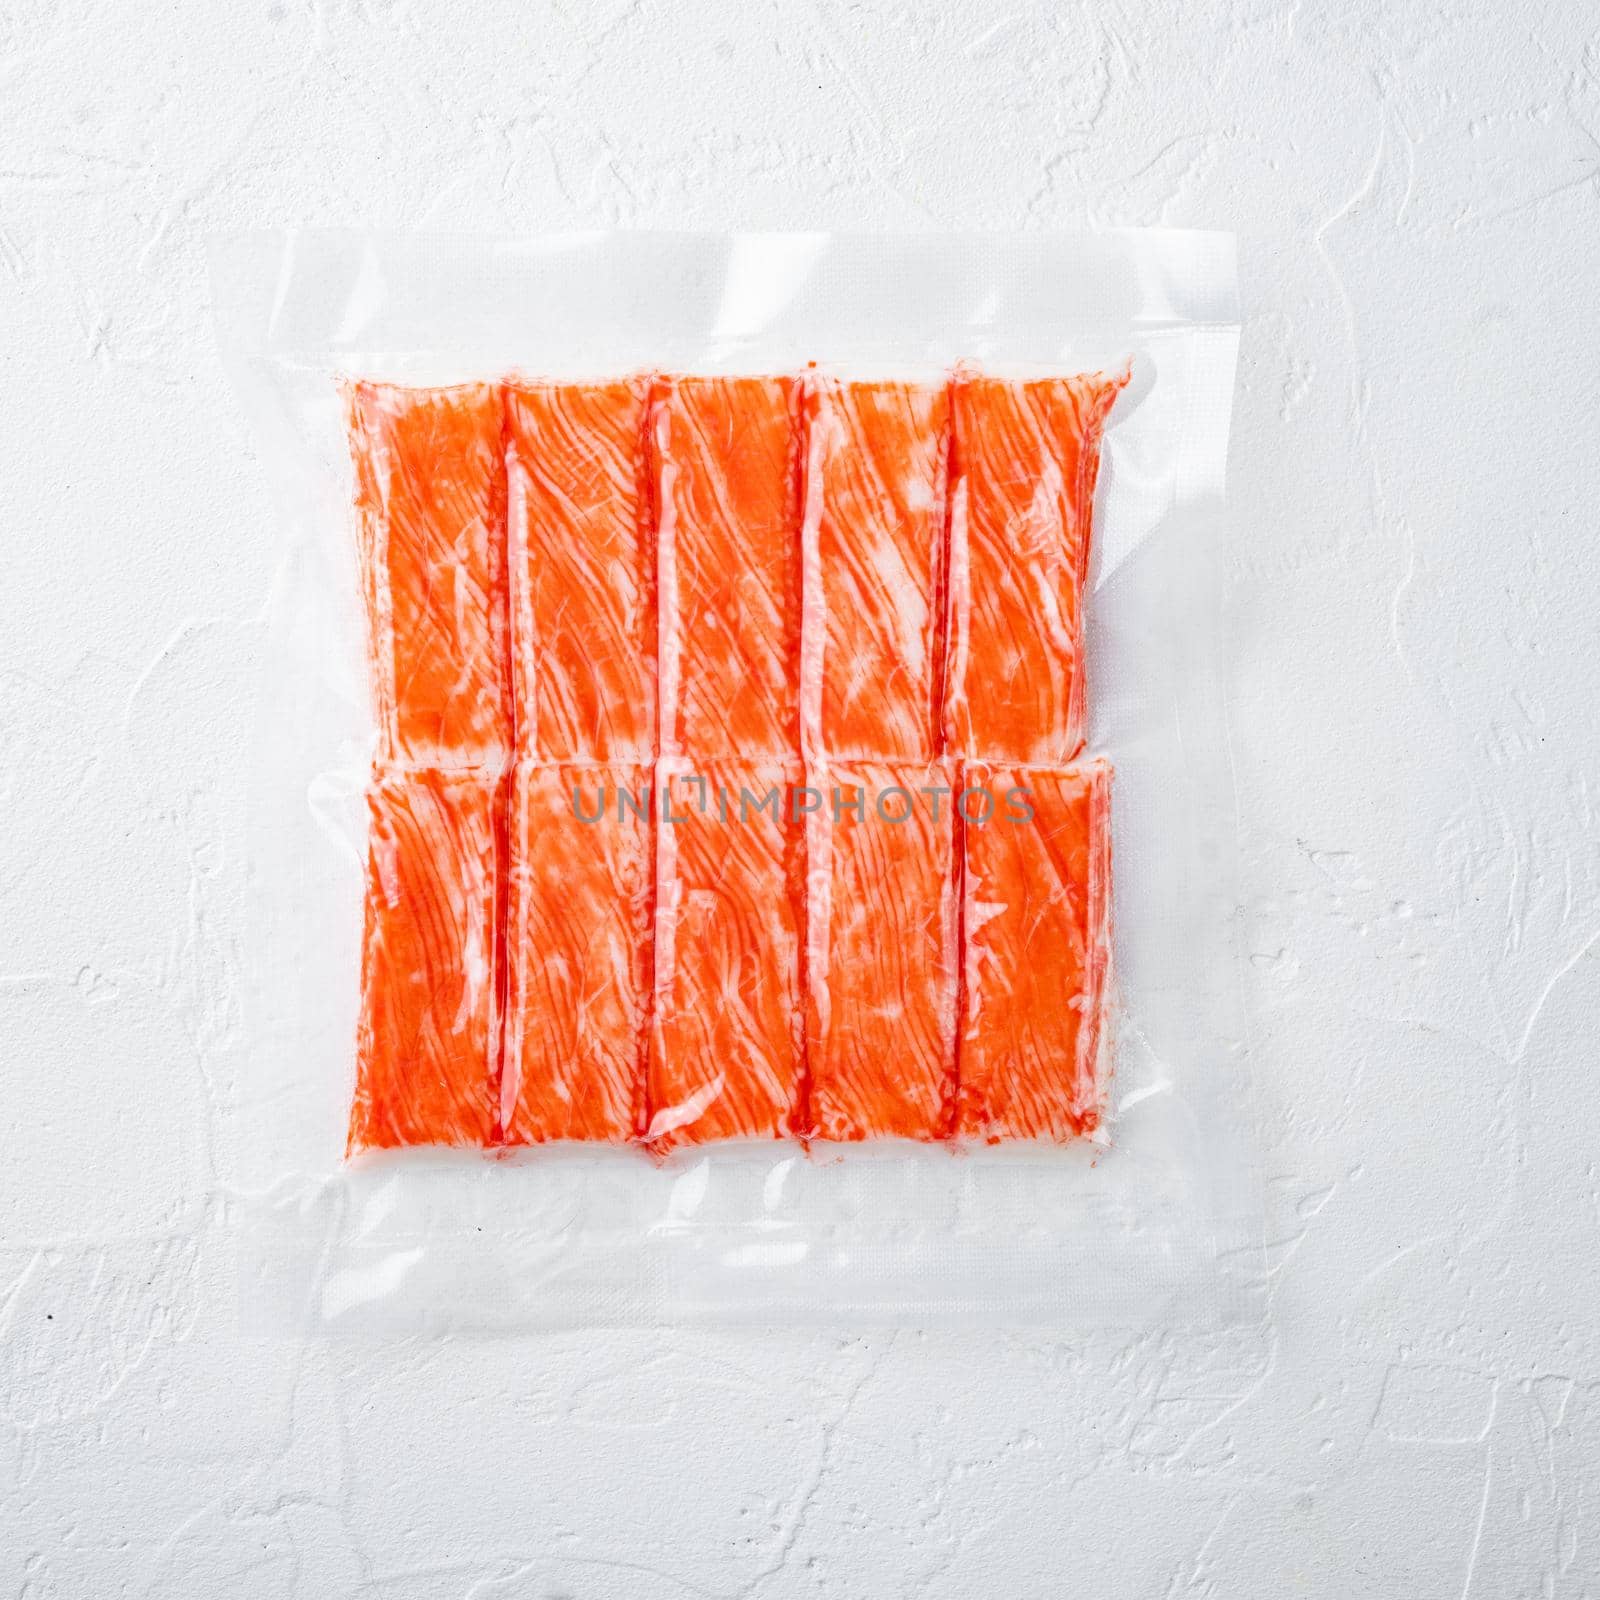 Crab fish meat sticks in vacuum pack, on white background, top view flat lay by Ilianesolenyi